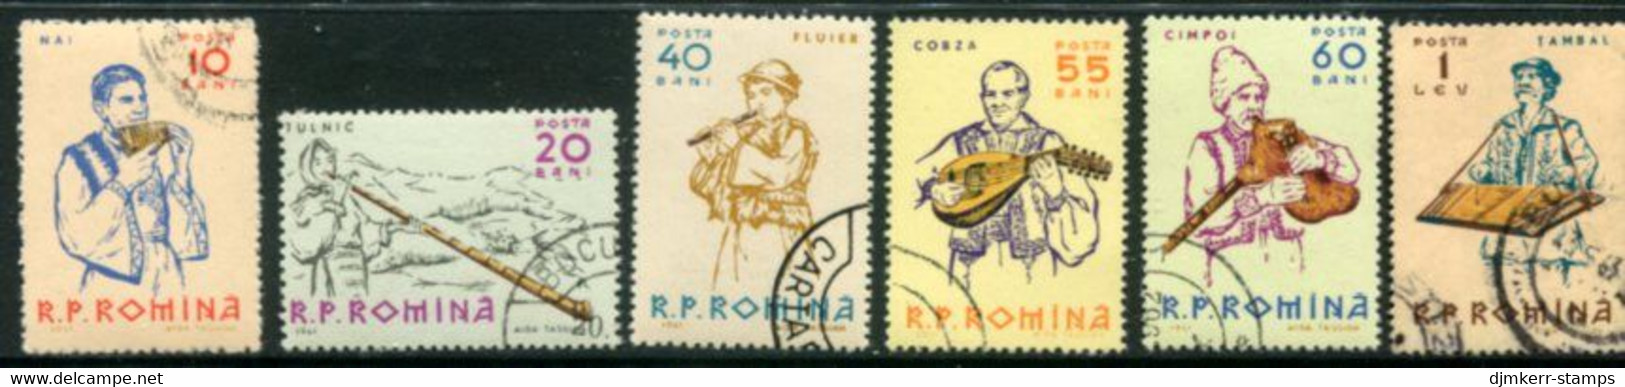 ROMANIA 1961 Musical Instruments Used.  Michel 1997-2002 - Used Stamps